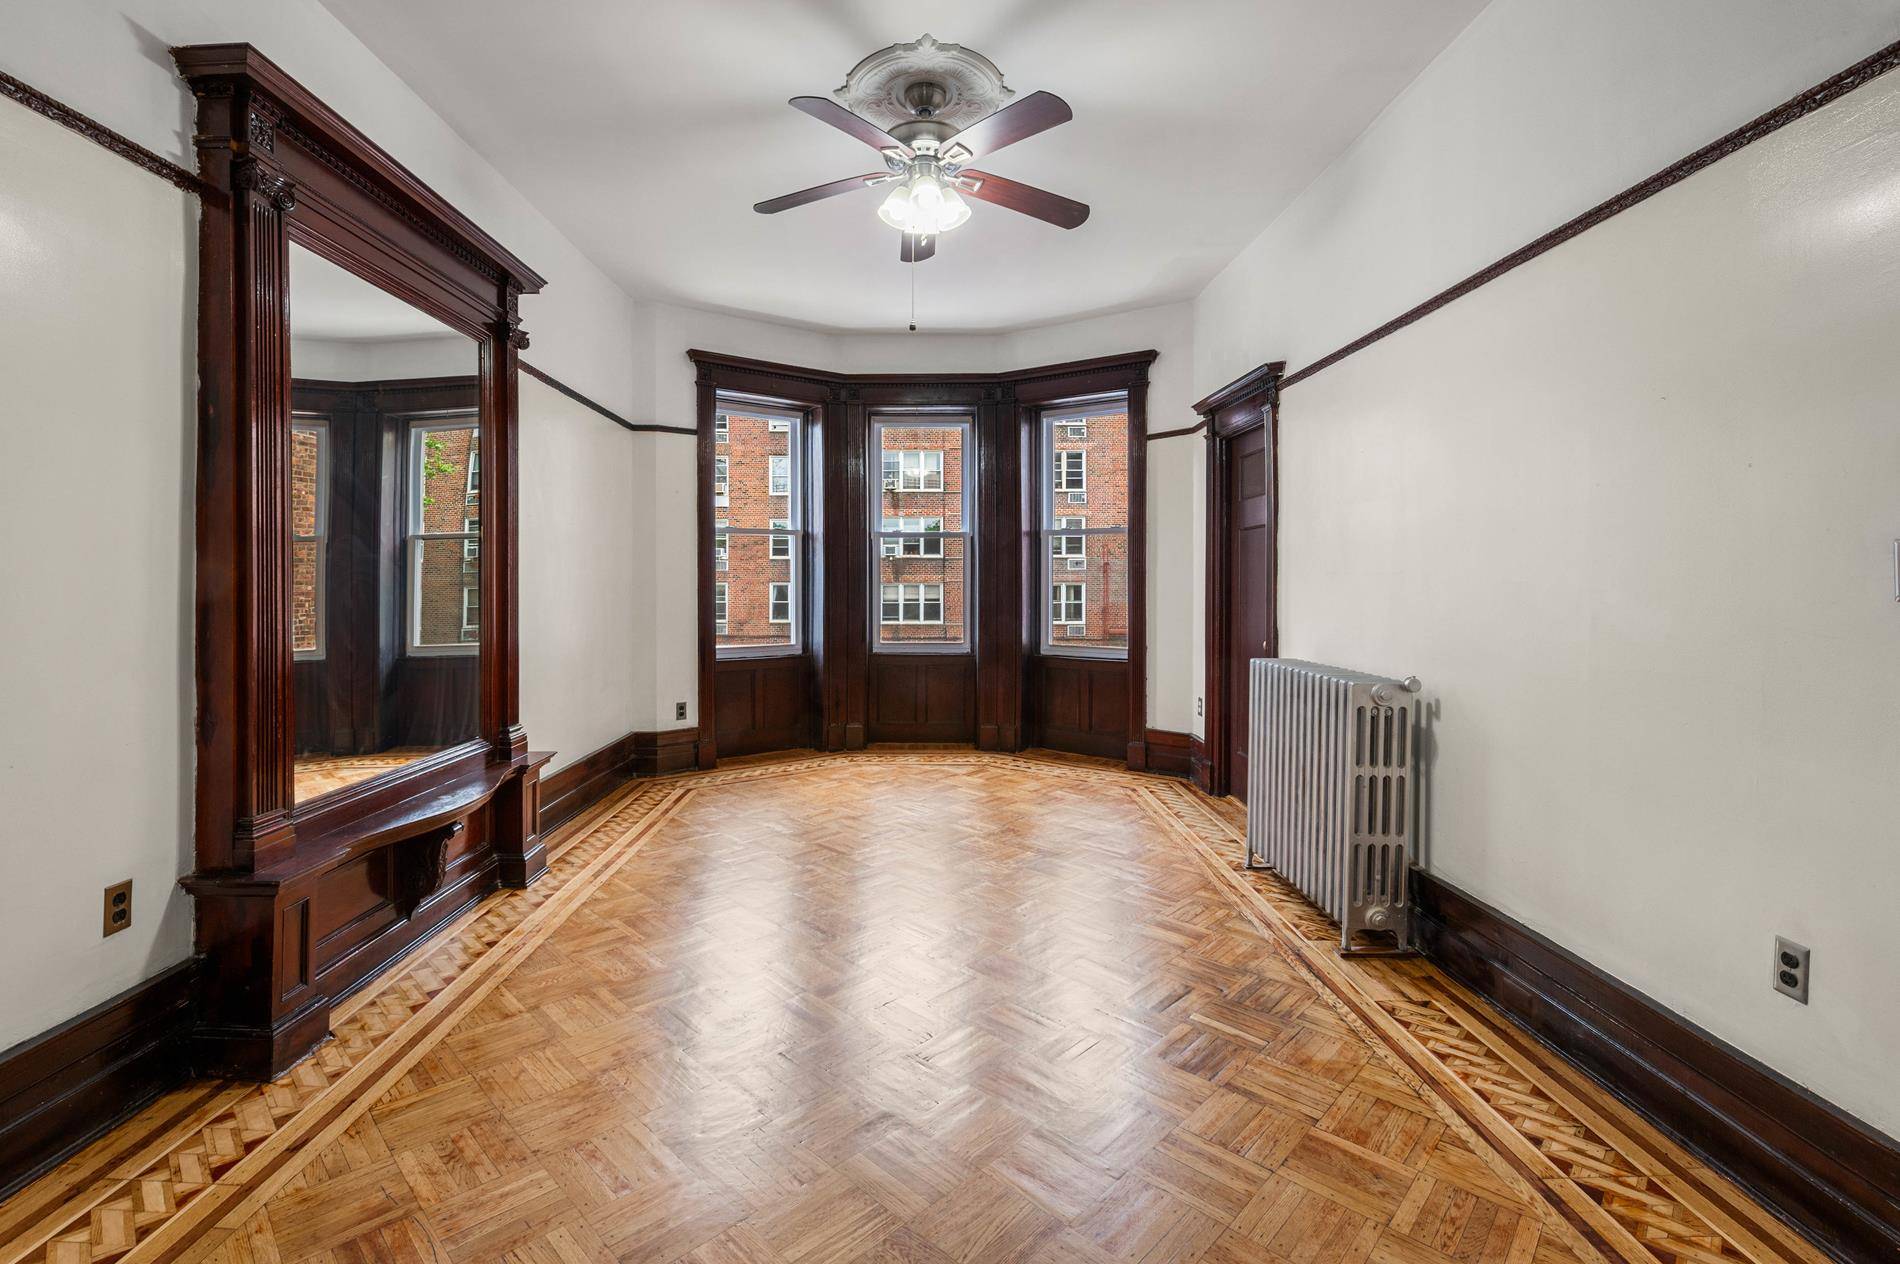 A Dreamy Prospect Lefferts Gardens Escape145 Hawthorne Street 3 is a magnificent apartment where modern design elements are paired with classic Brooklyn architecture to create the perfect home.